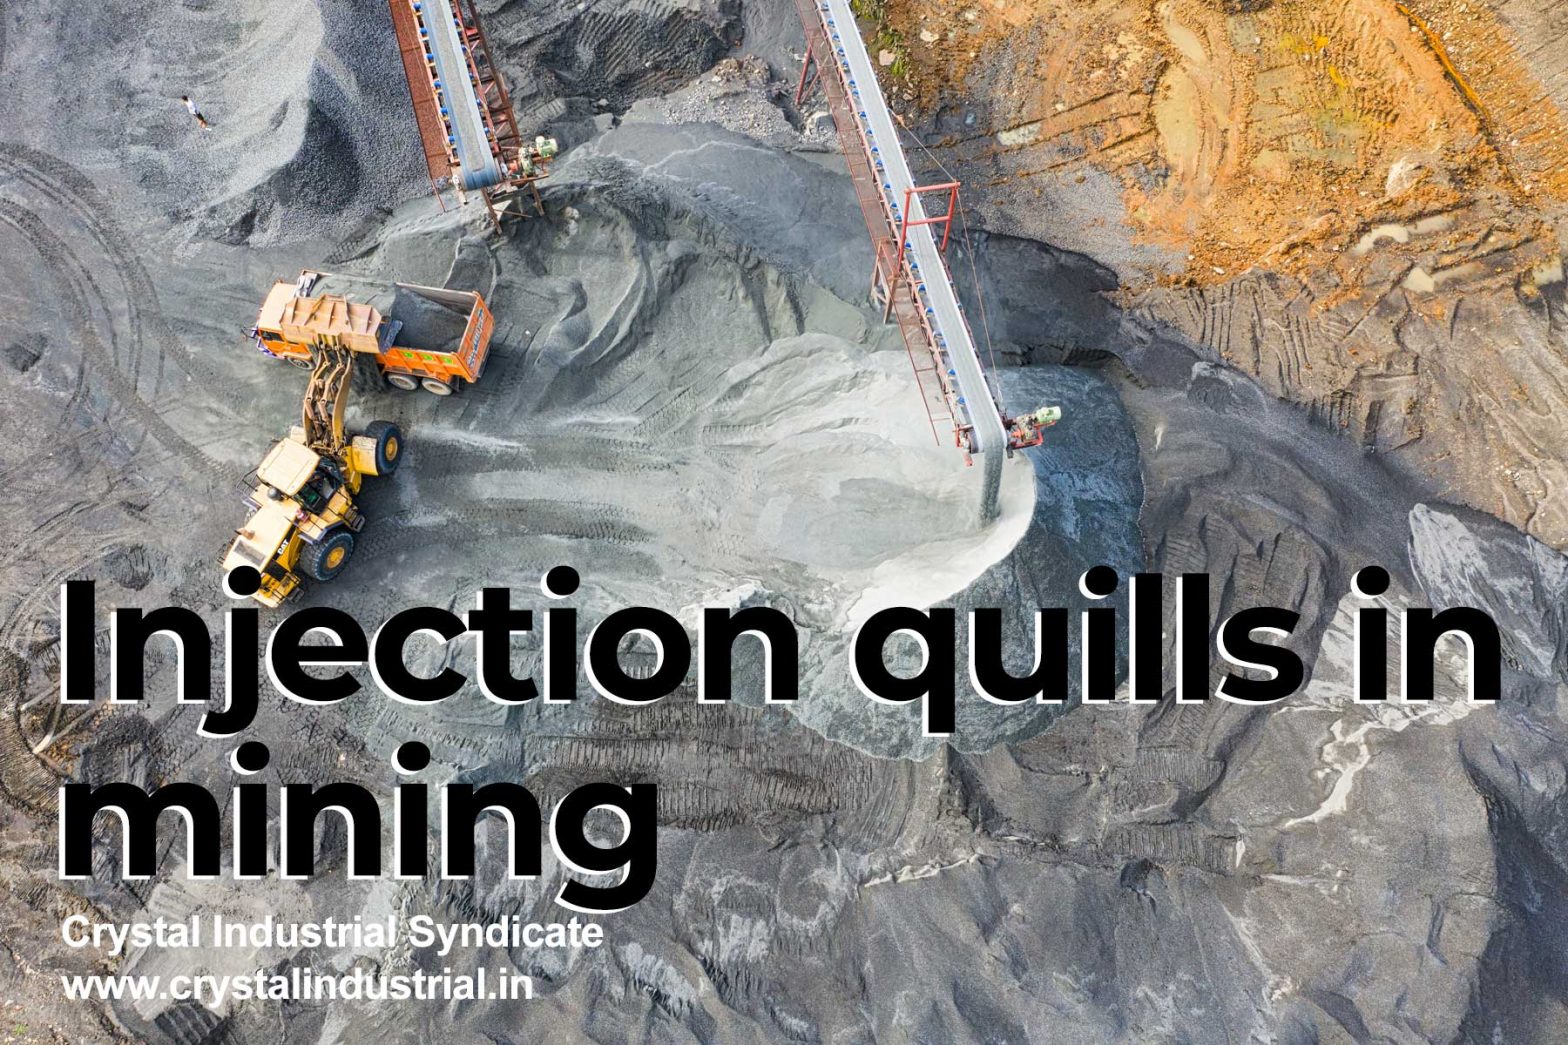 Future developments in injection quills for the mining industry